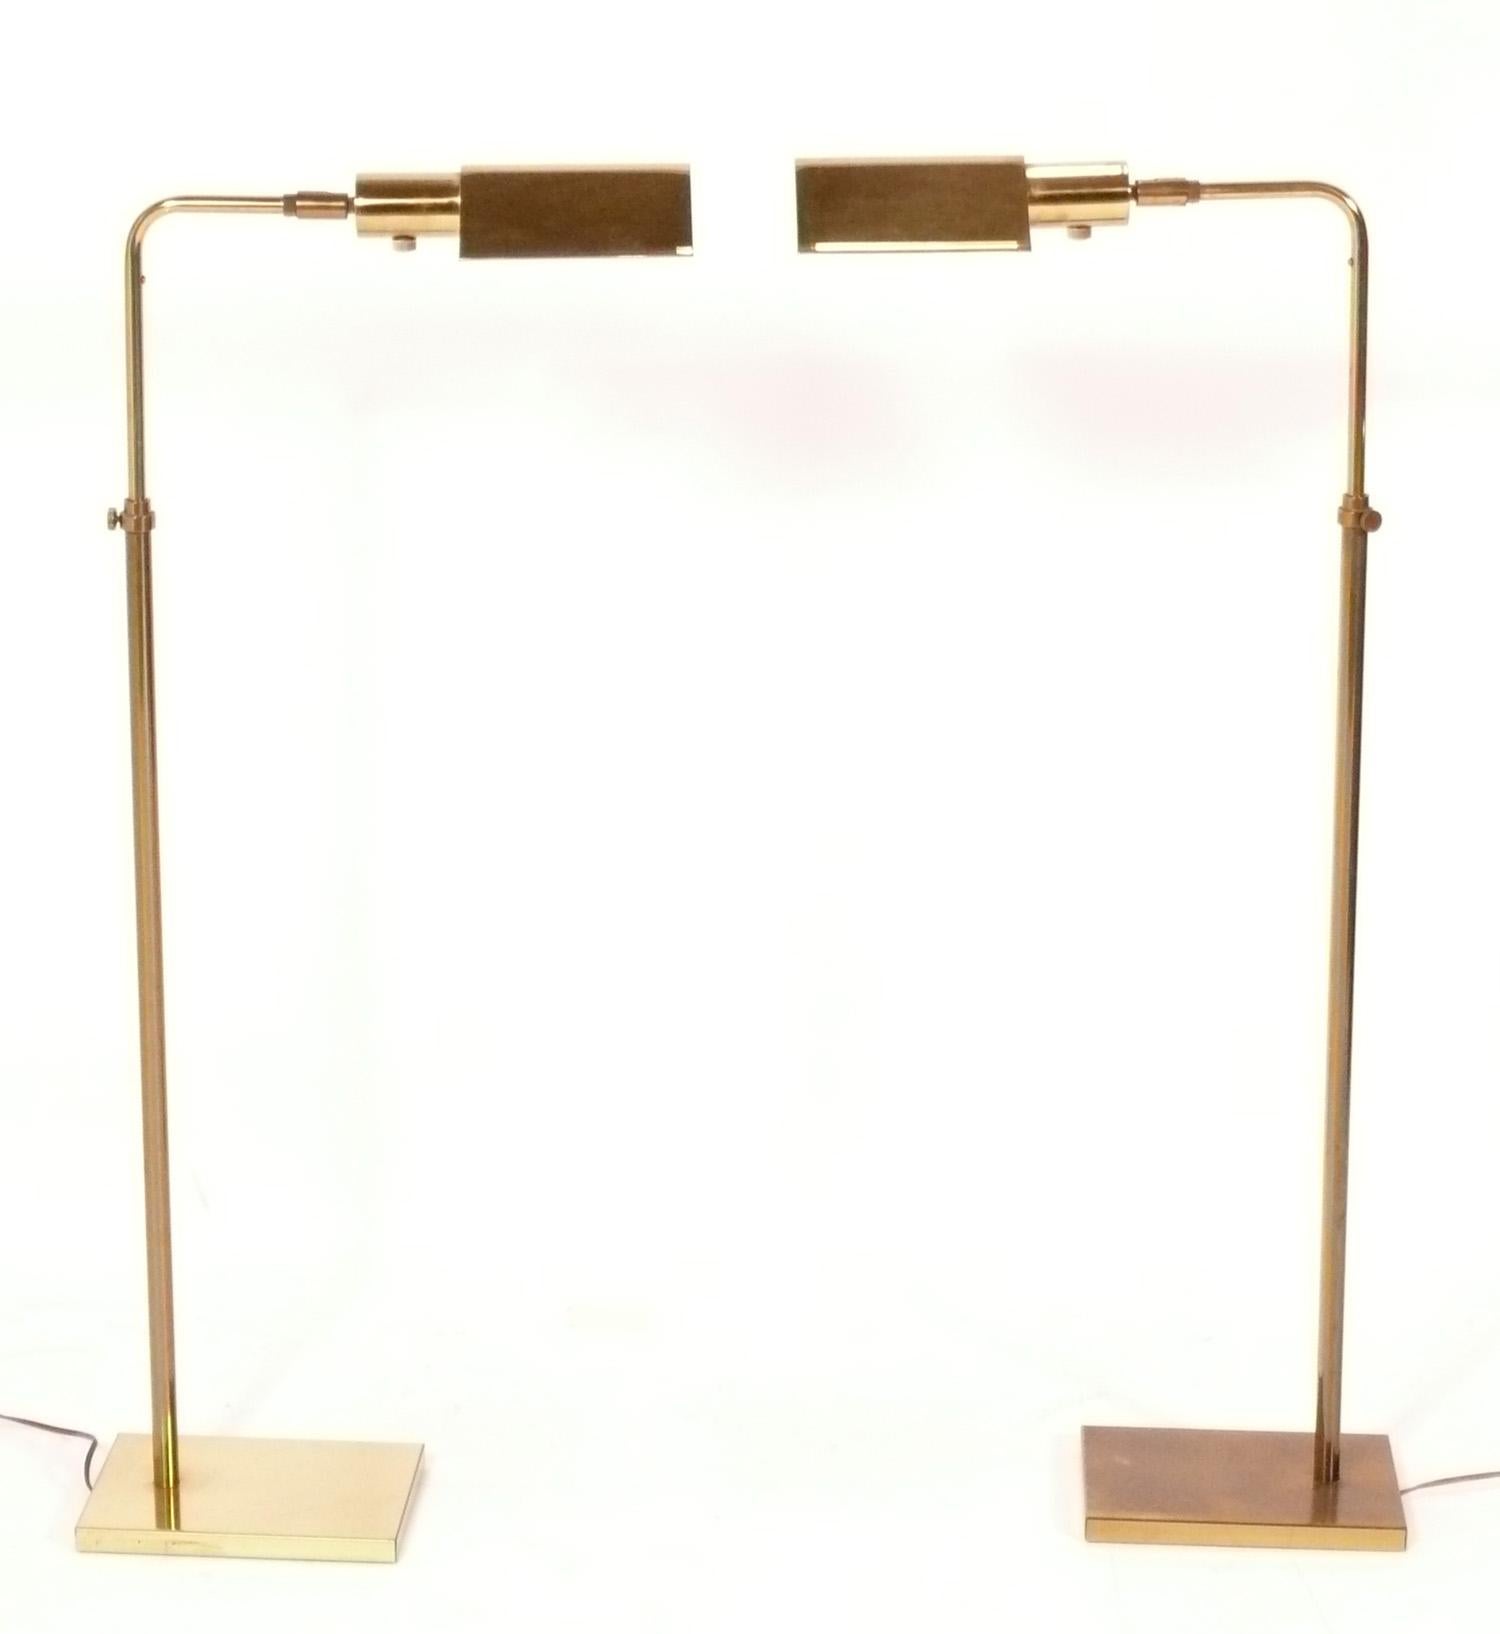 Pair of clean lined Mid-Century Modern pharmacy lamps, designed by Koch and Lowy, American, circa 1960s. They are adjustable in height, and they also swivel and tilt, making them the perfect reading lamps. They retain their warm original patina to